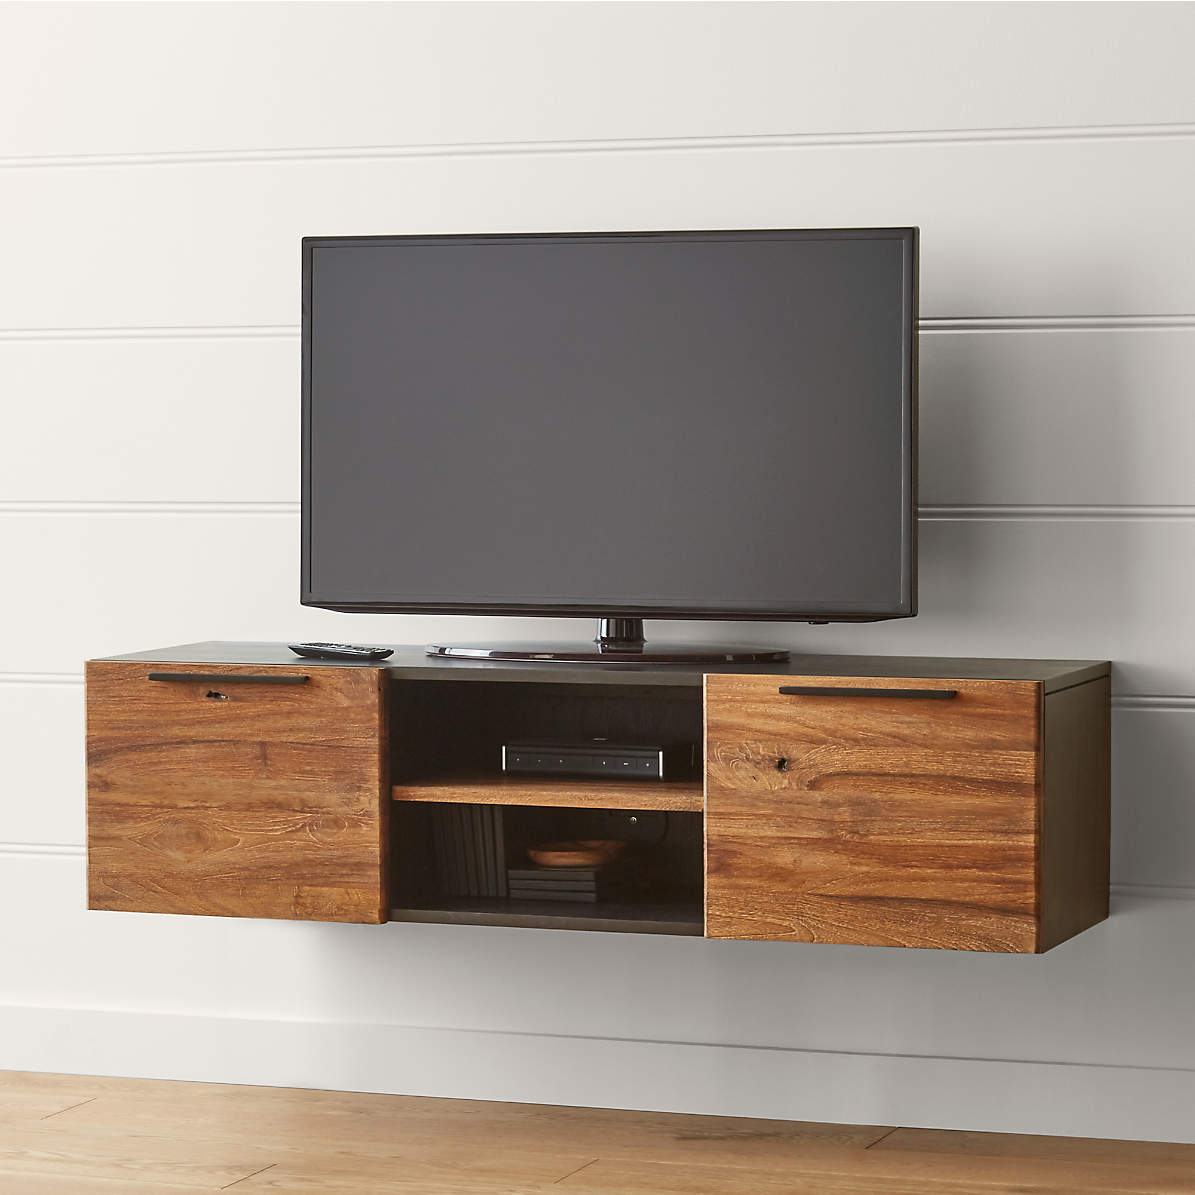 Rigby Natural 55 Small Floating Media Console Reviews Crate And Barrel Canada